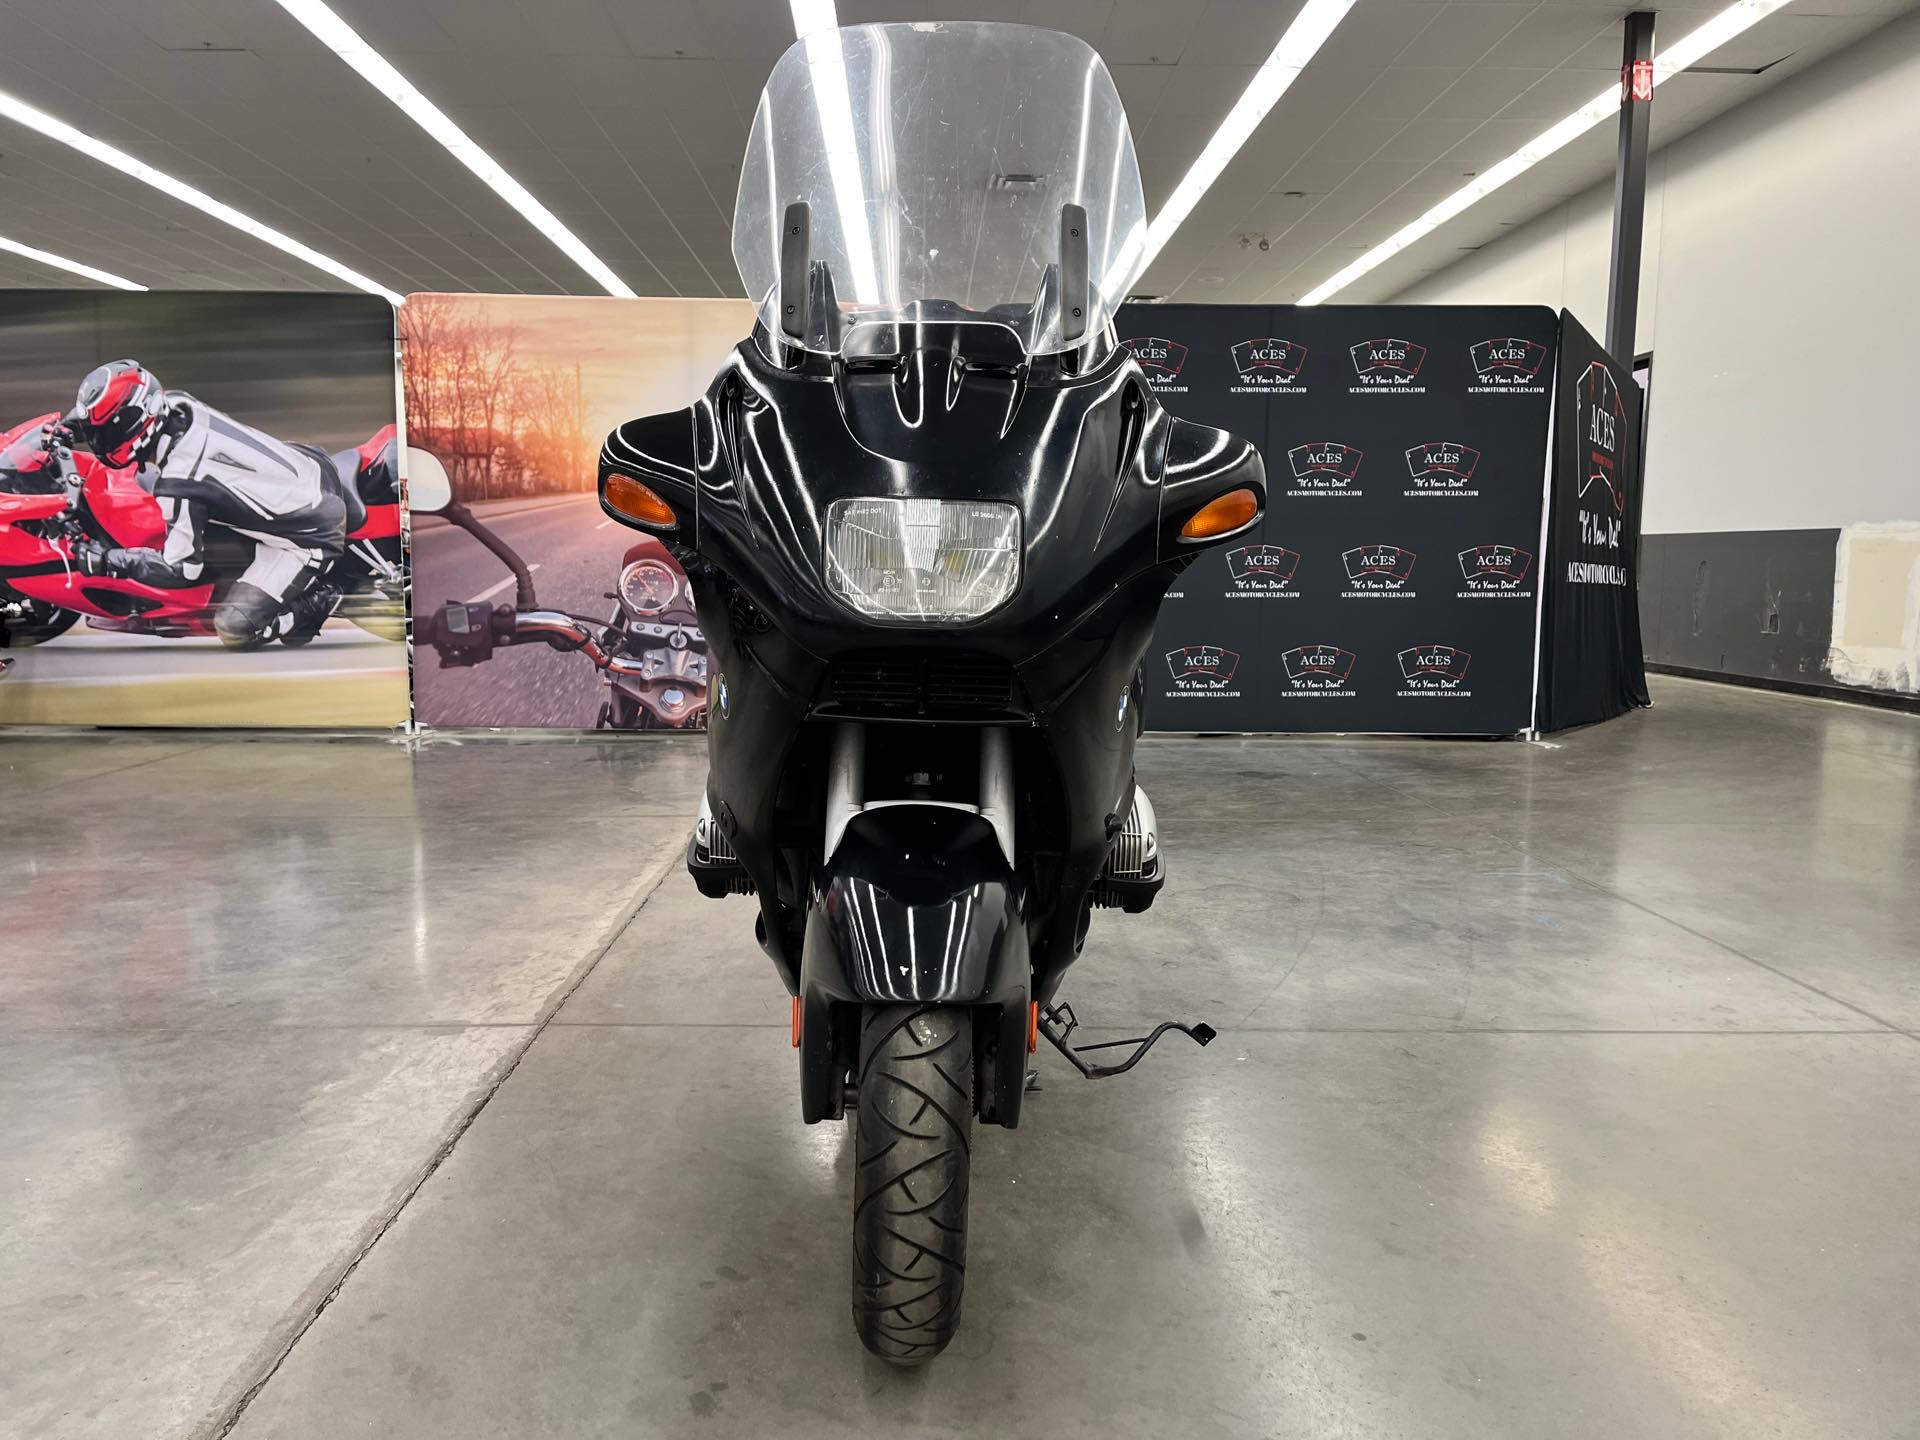 2000 BMW R1100RT at Aces Motorcycles - Denver